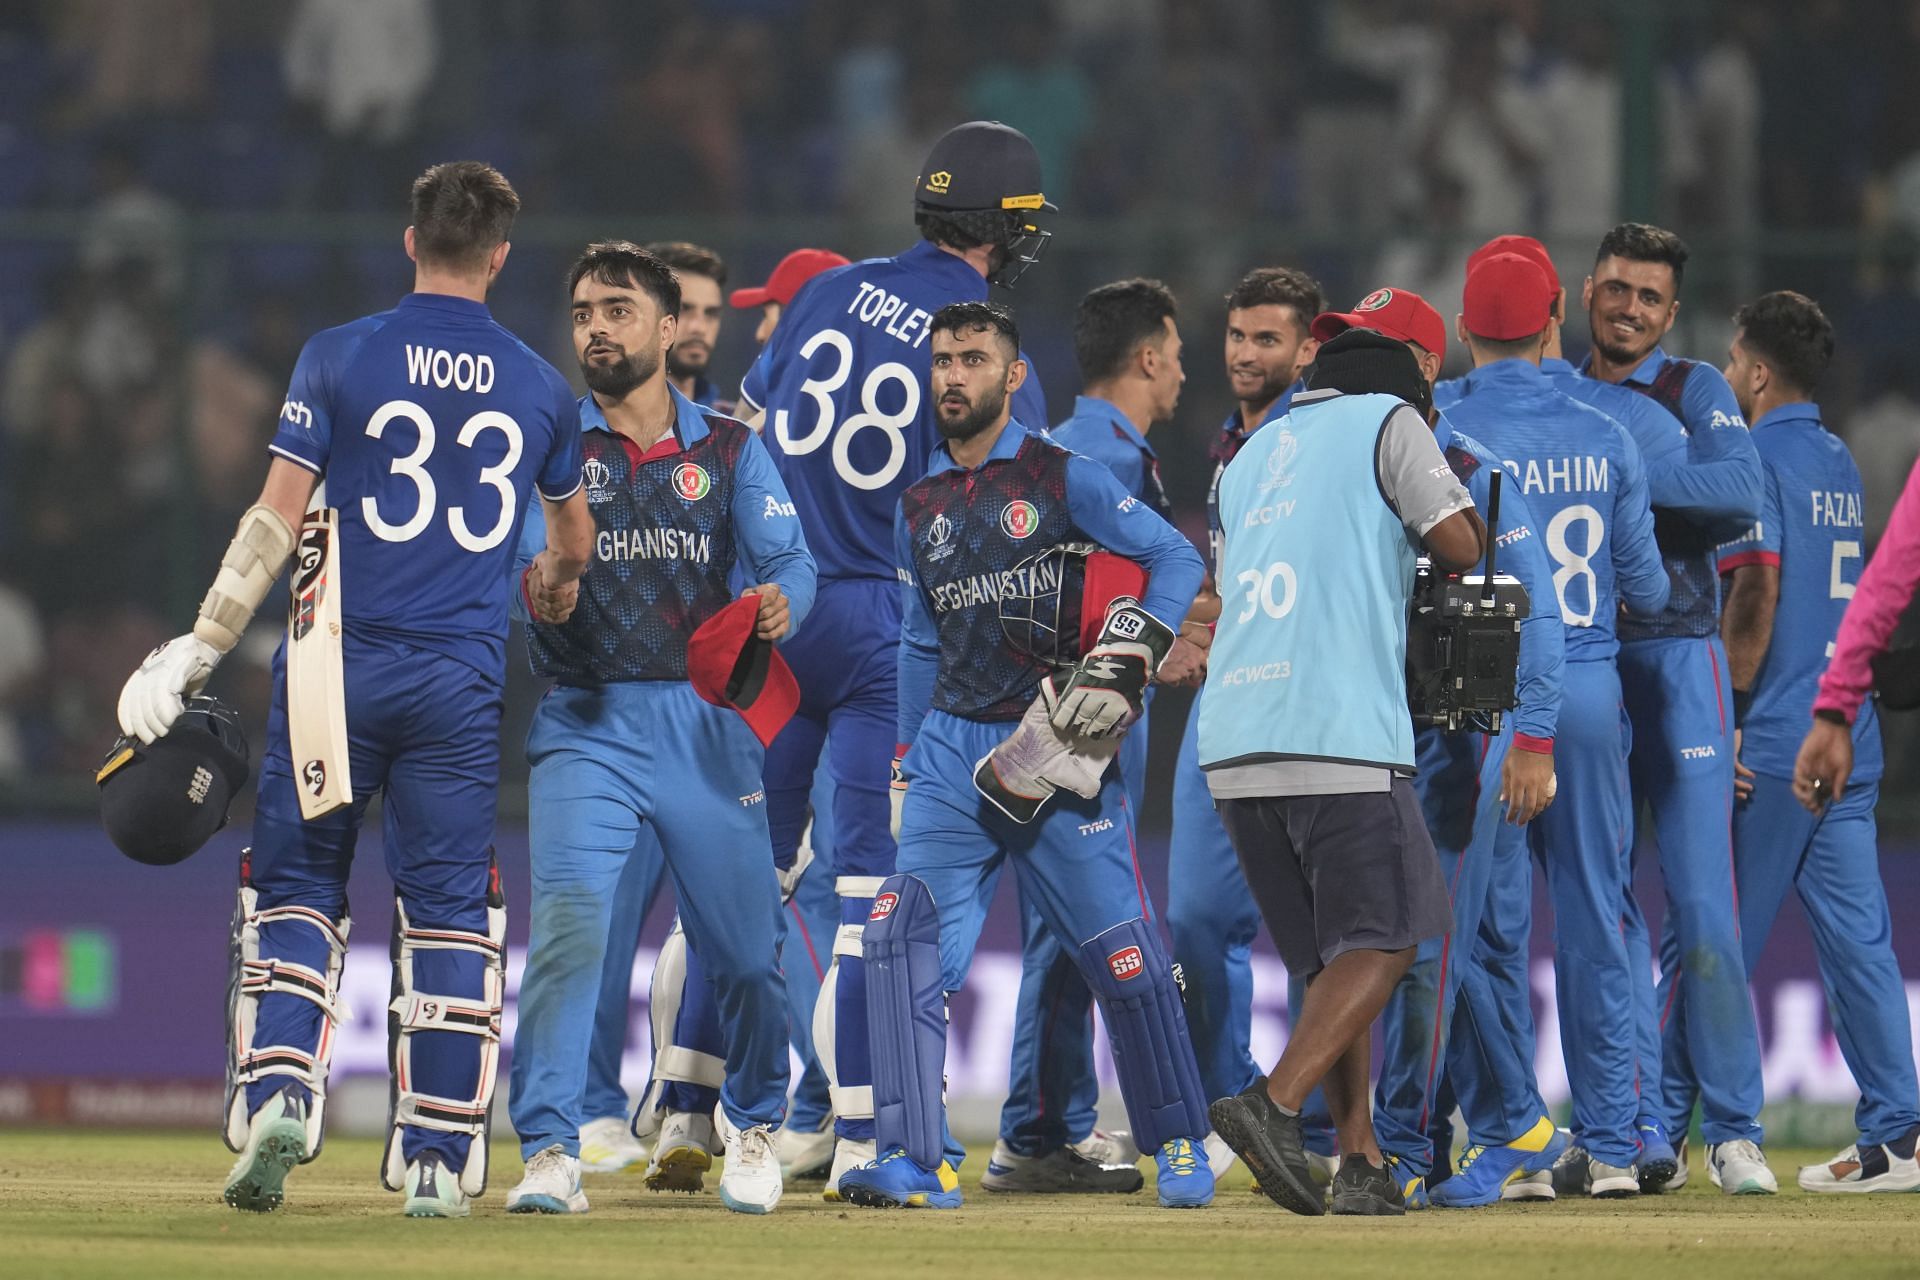 Afghanistan have already stunned England earlier in the tournament. [P/C: AP]